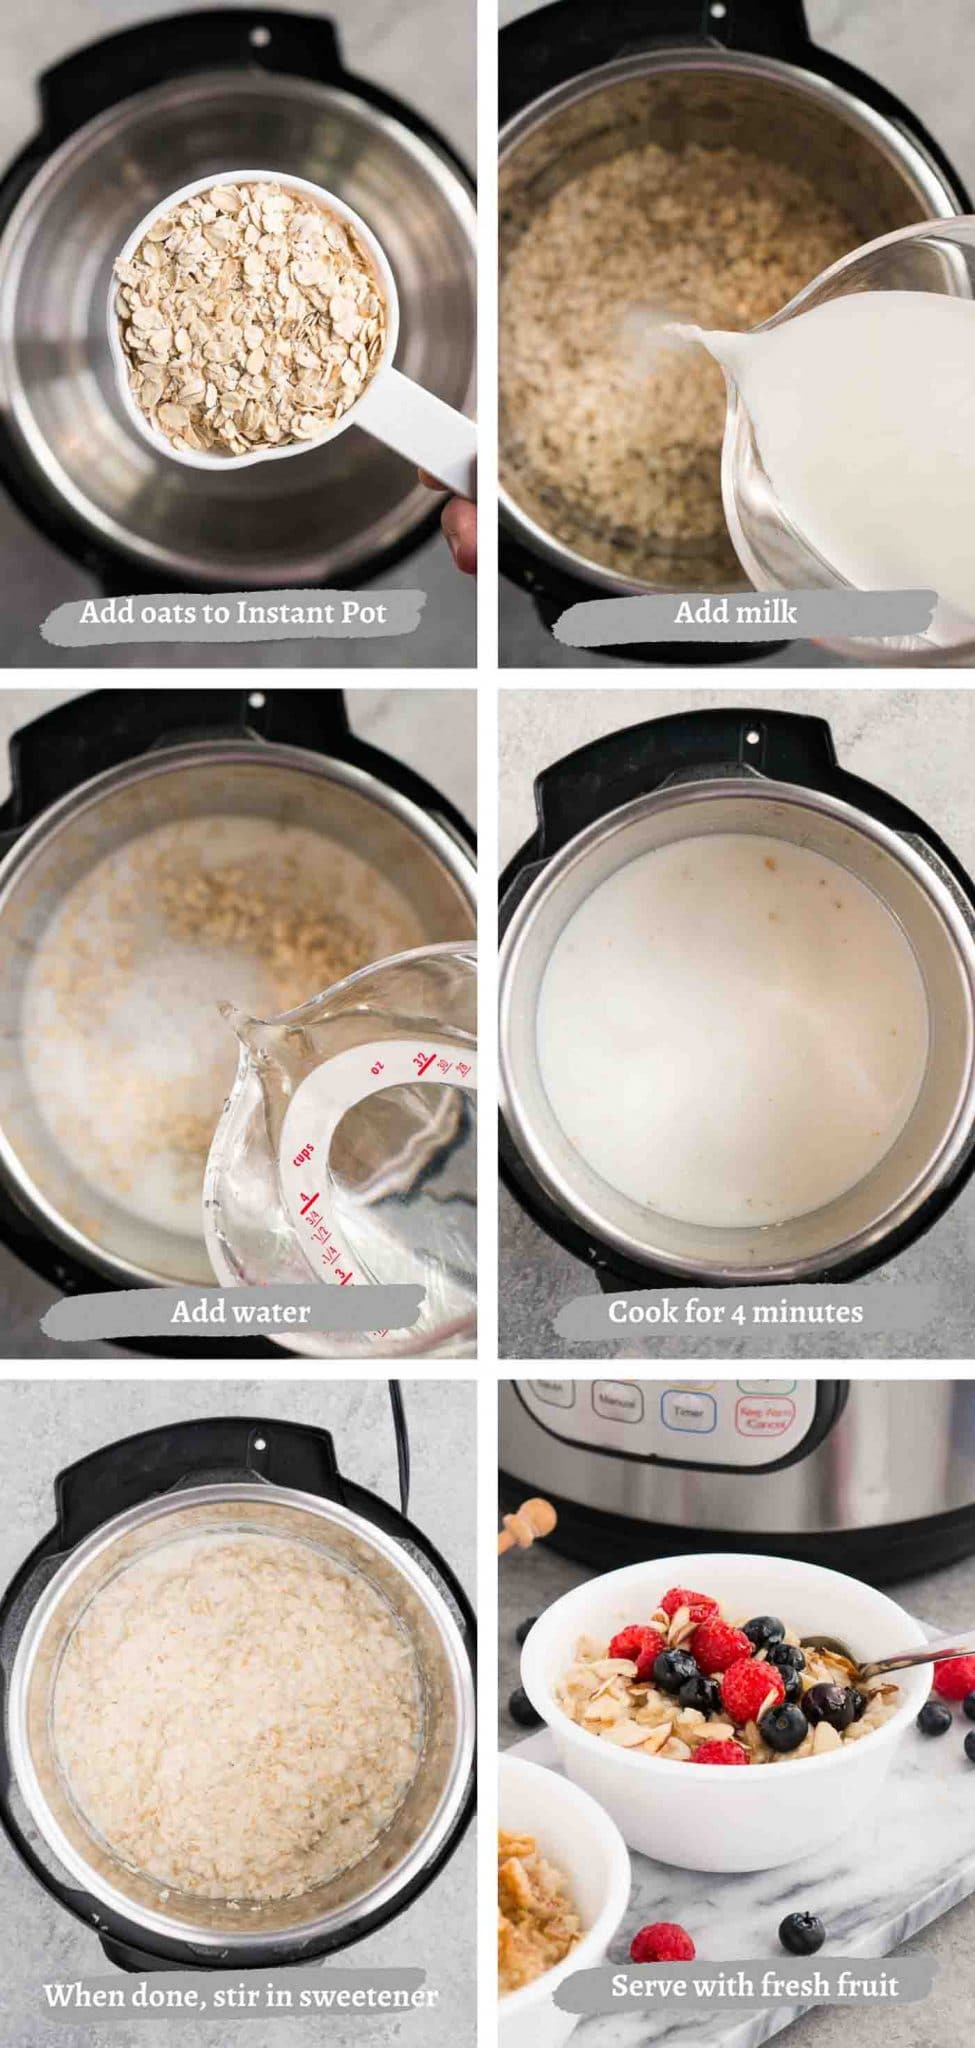 process images of making oatmeal in instant pot